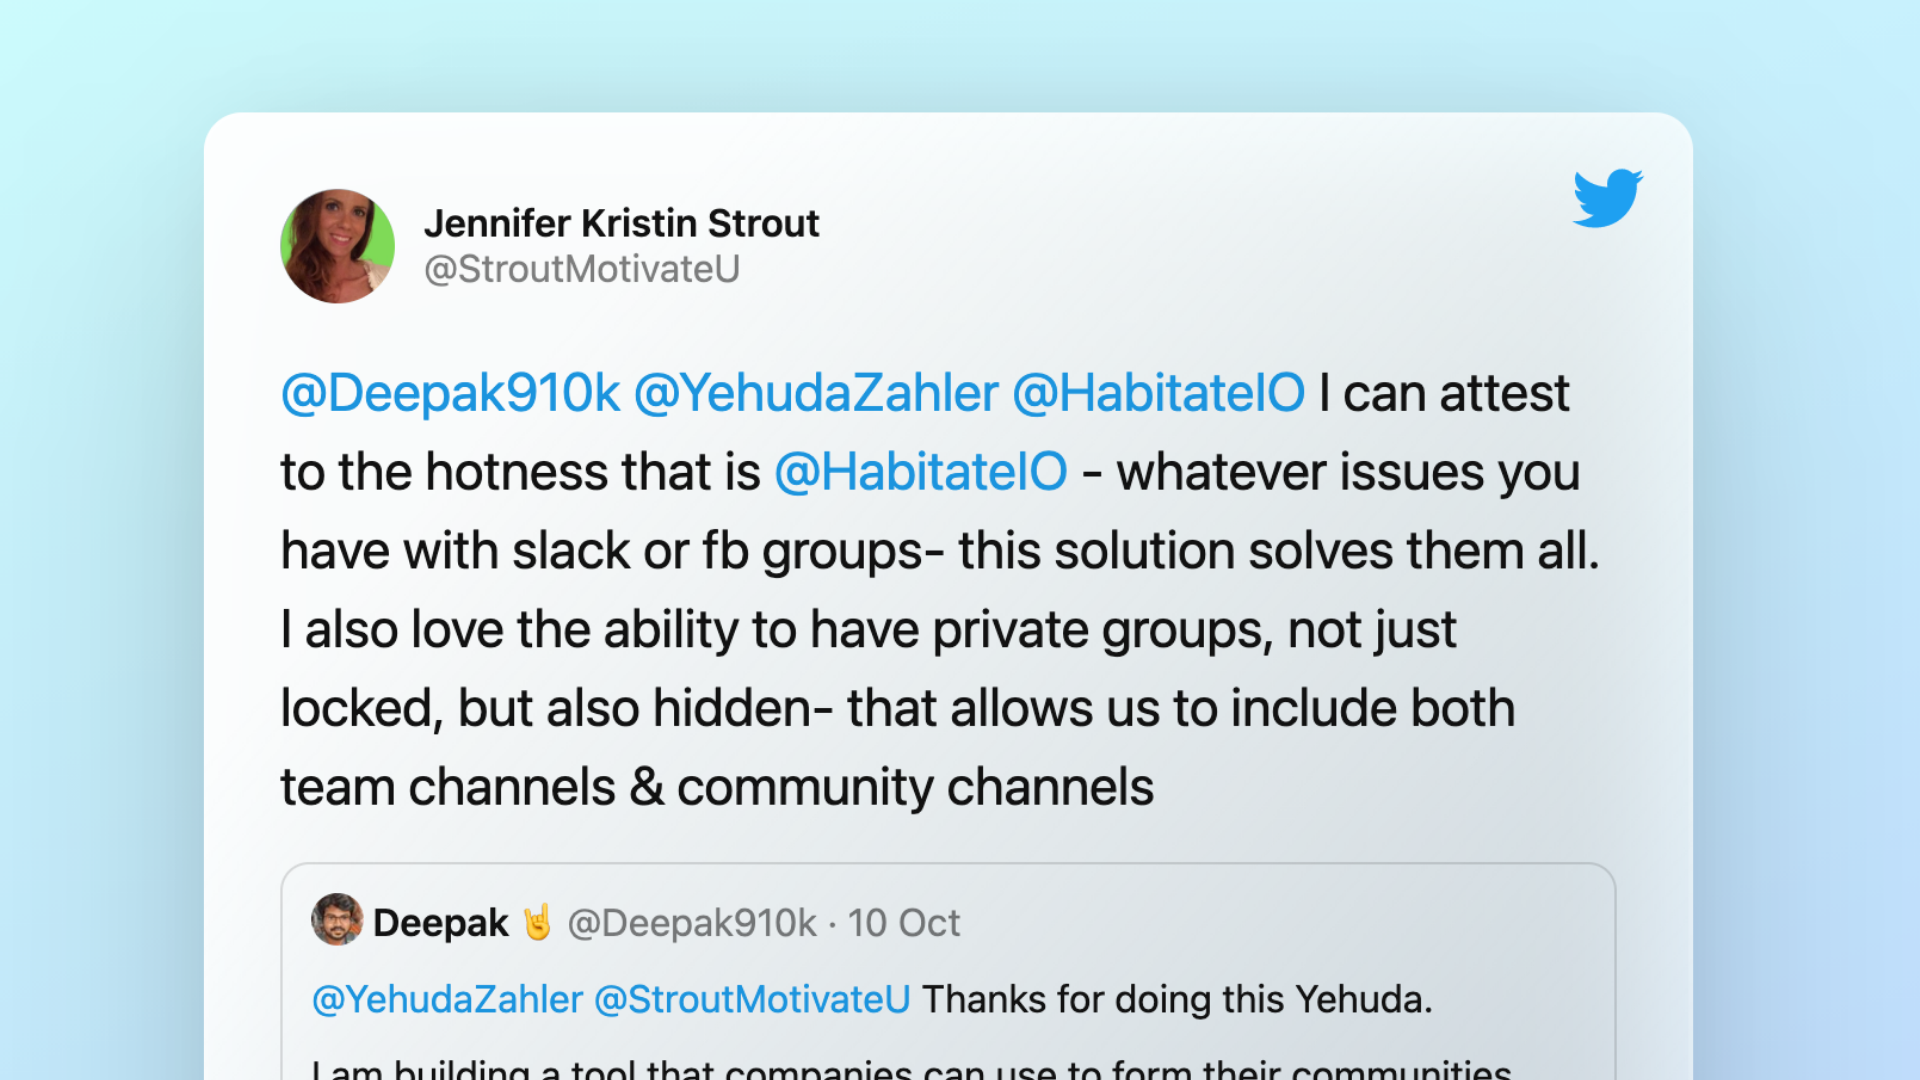 Tweet from Jennifer Kristin Strout. She says she can attest to the hotness of Habitate. Whatever issues you have with slack or fb groups, this solution solves them all